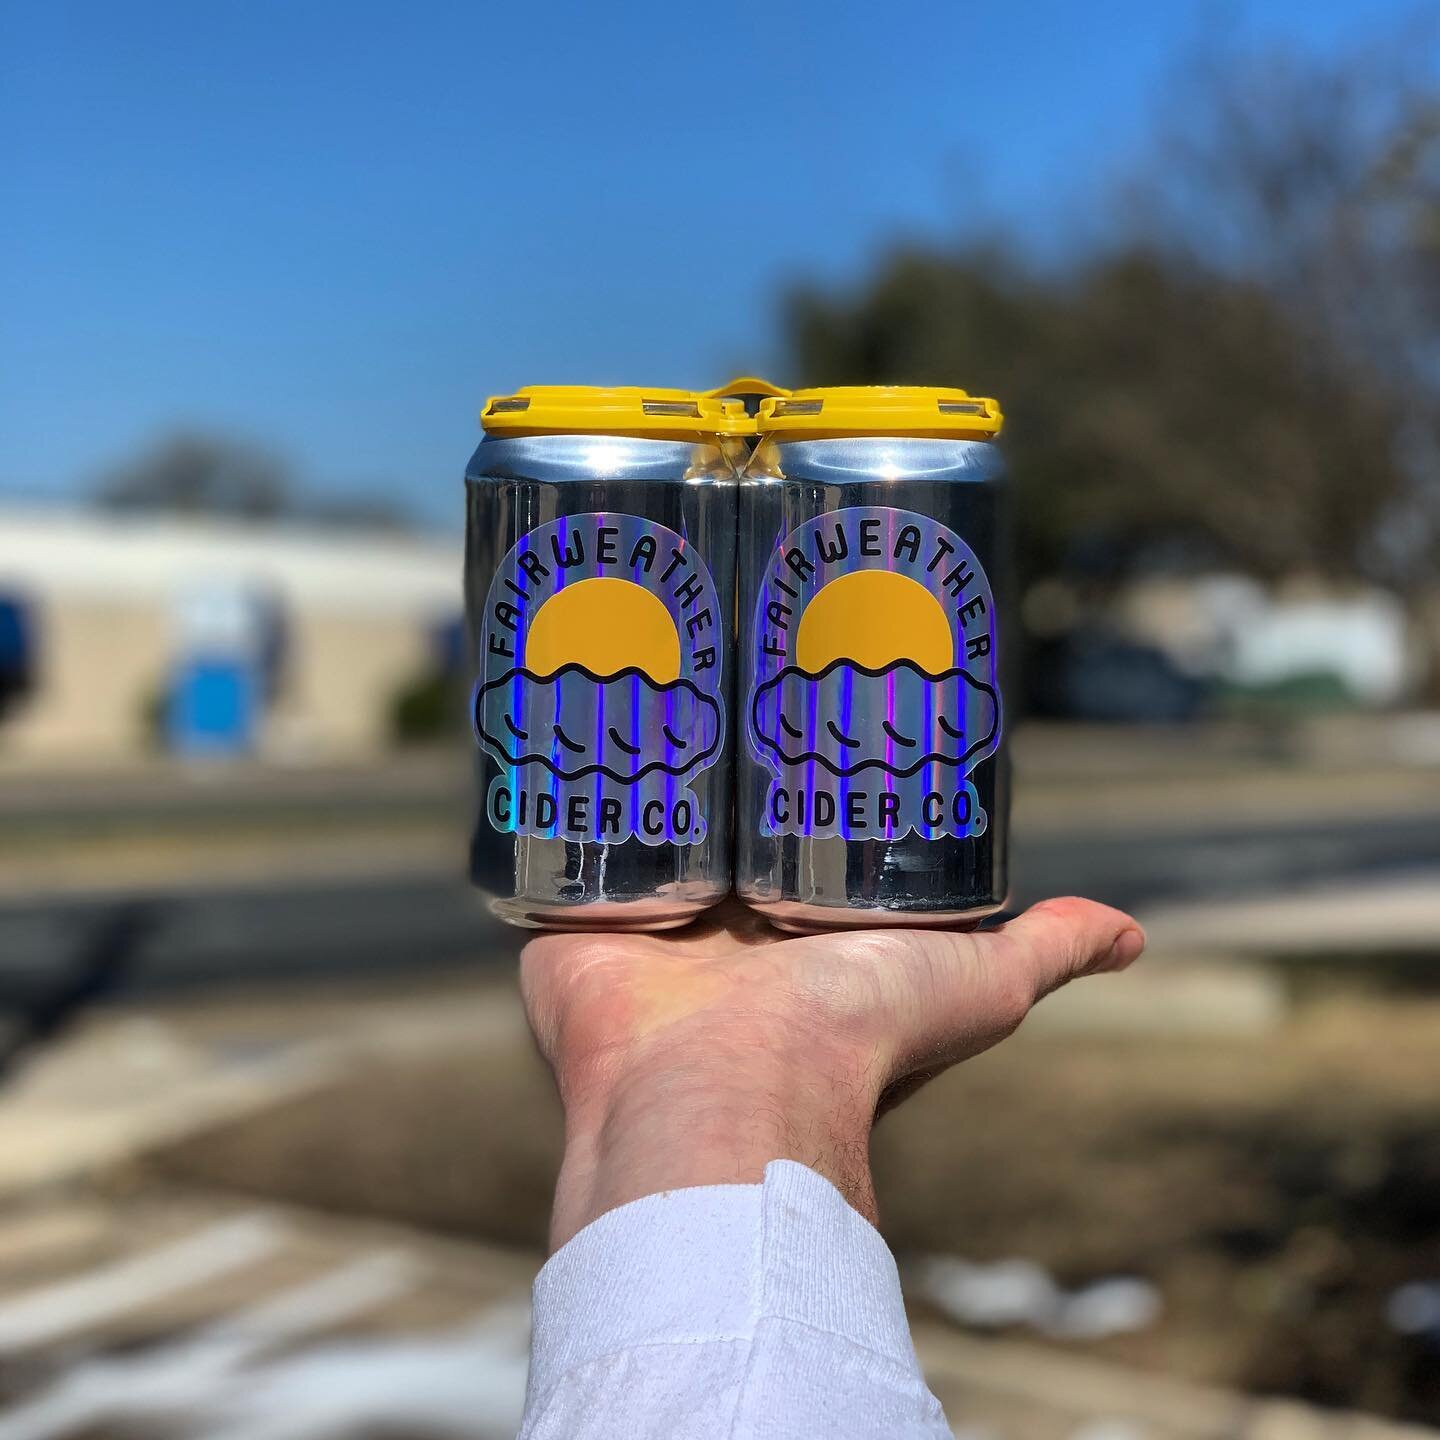 💦 FREE WATER 💦 

We have 4 packs of purified water that are completely free as long as you have a mask. 

Huge shout out to our friends and neighbors @hopsquadbrewing that have been dedicating their system to boil and purify water as many other bre